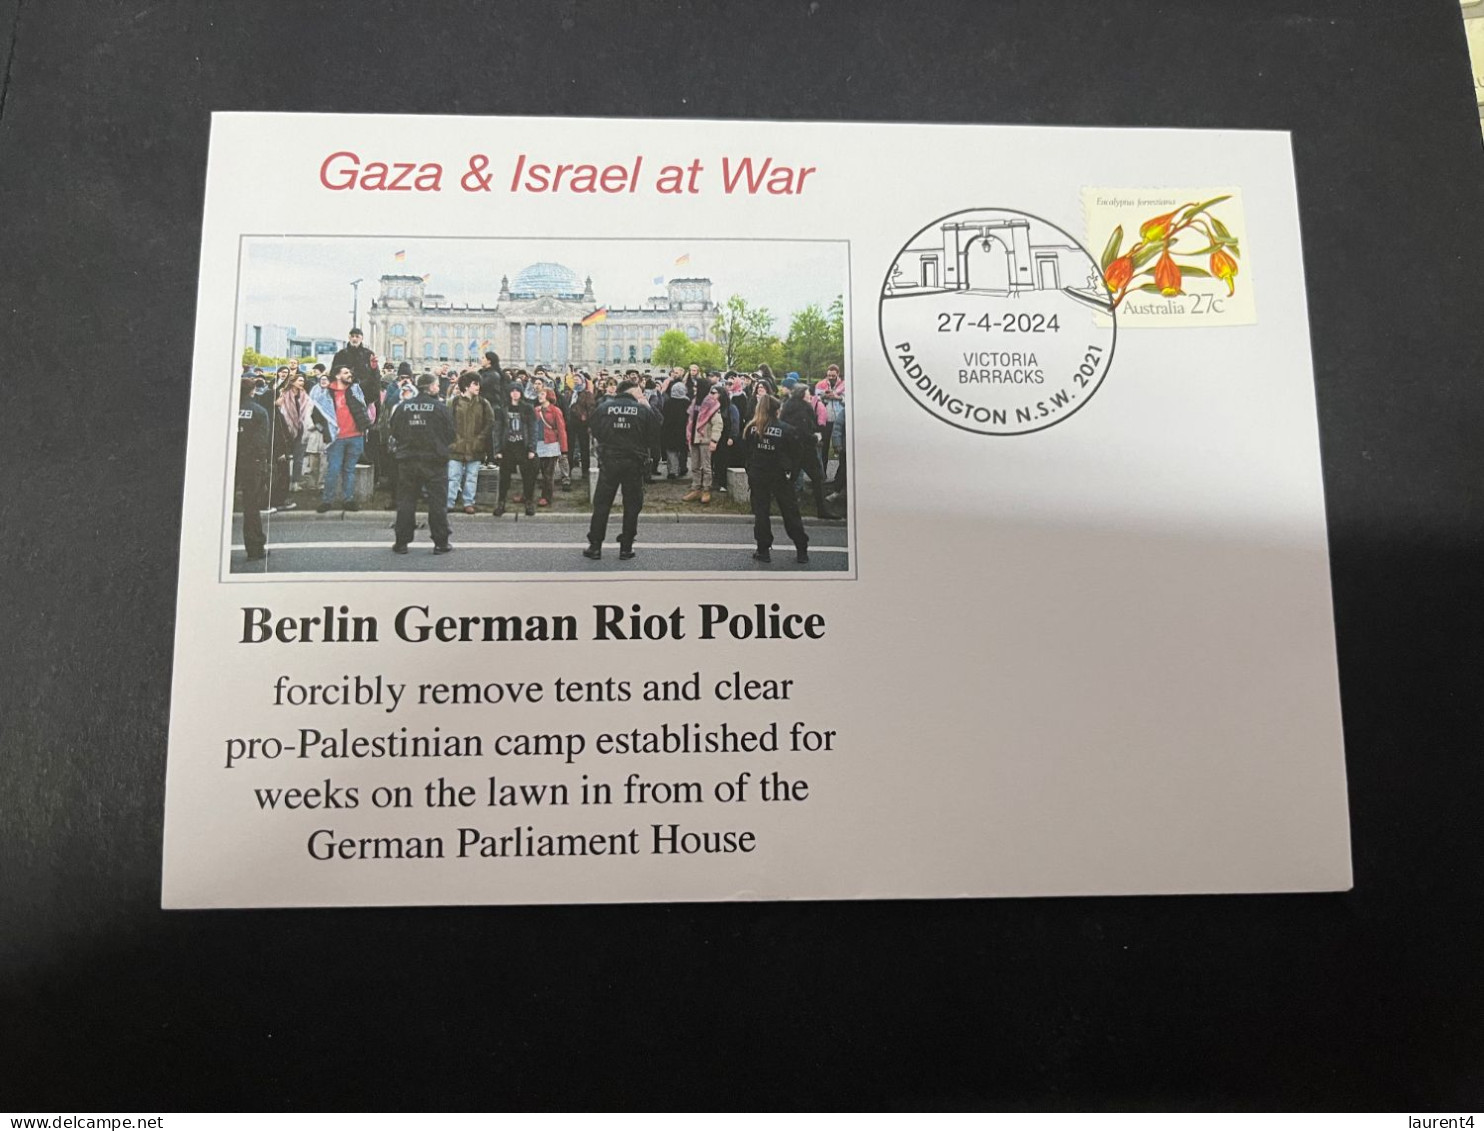 28-4-2024 (3 Z 17) GAZA - Berlin German Riot Police Forcibly Remove Tents And Clear Por-Plestian Camp On Lawn - Militaria